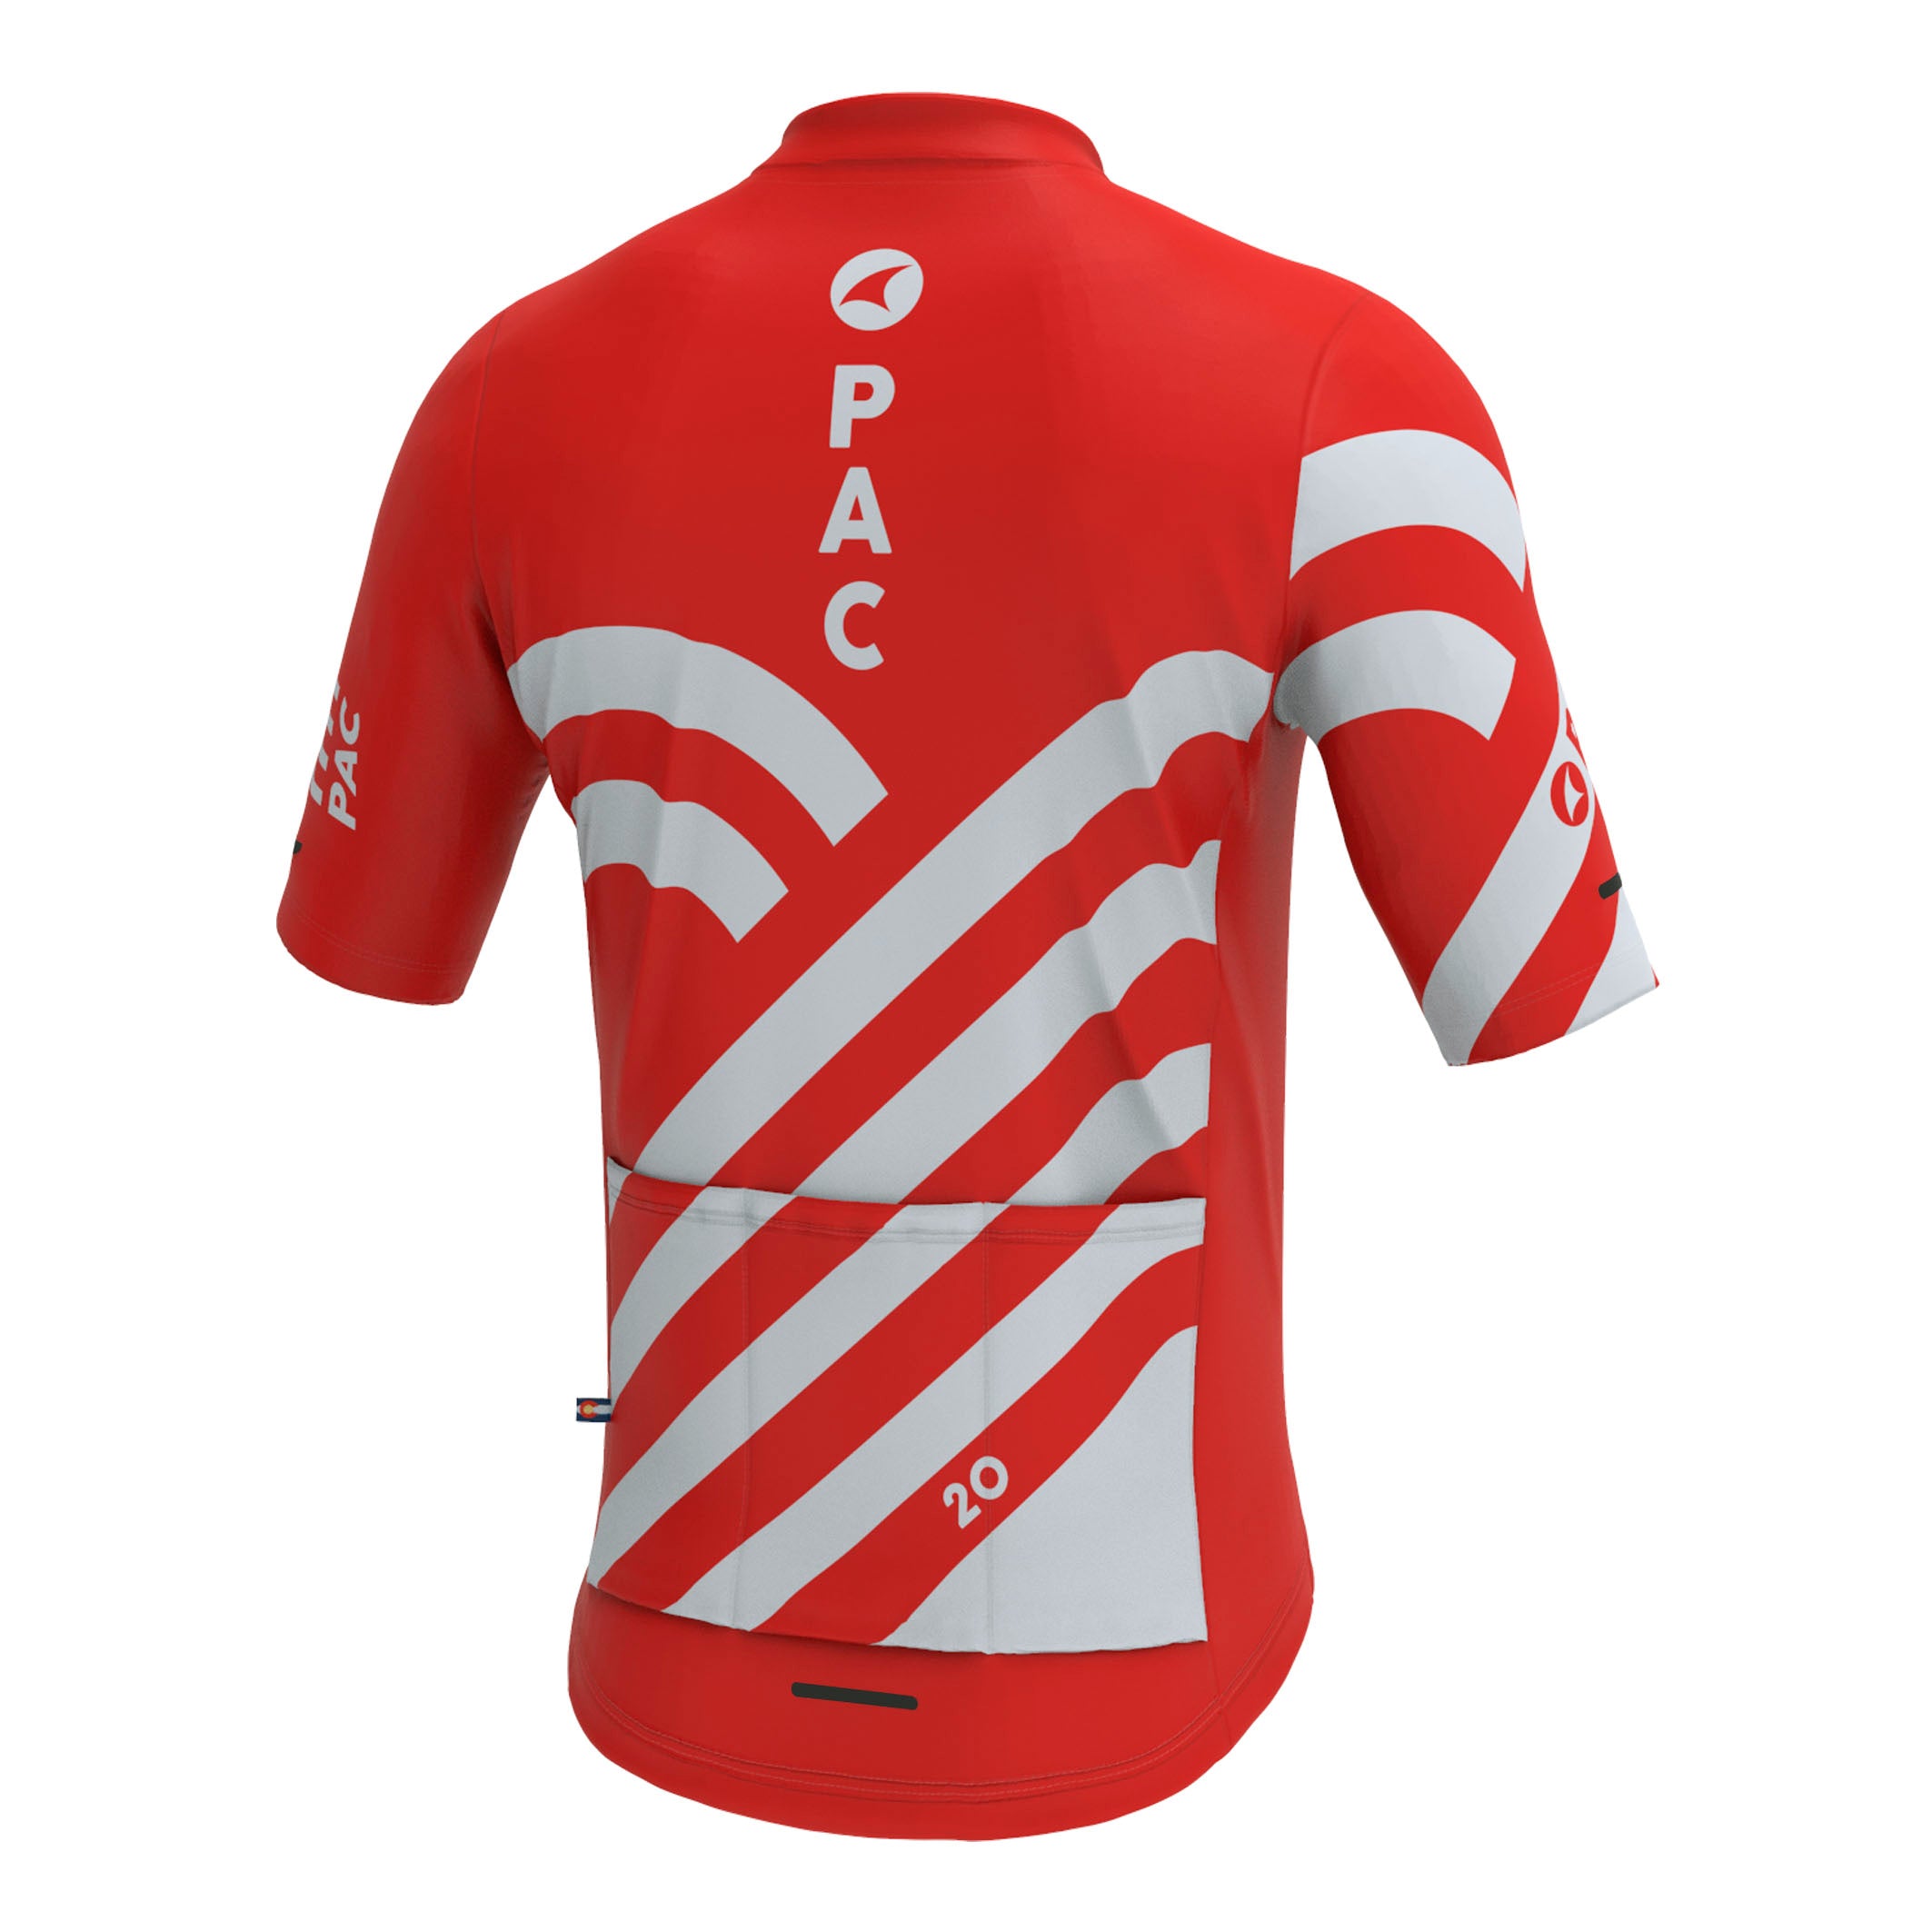 Pactimo Ambassador Club Cycling Ascent Jersey for Men